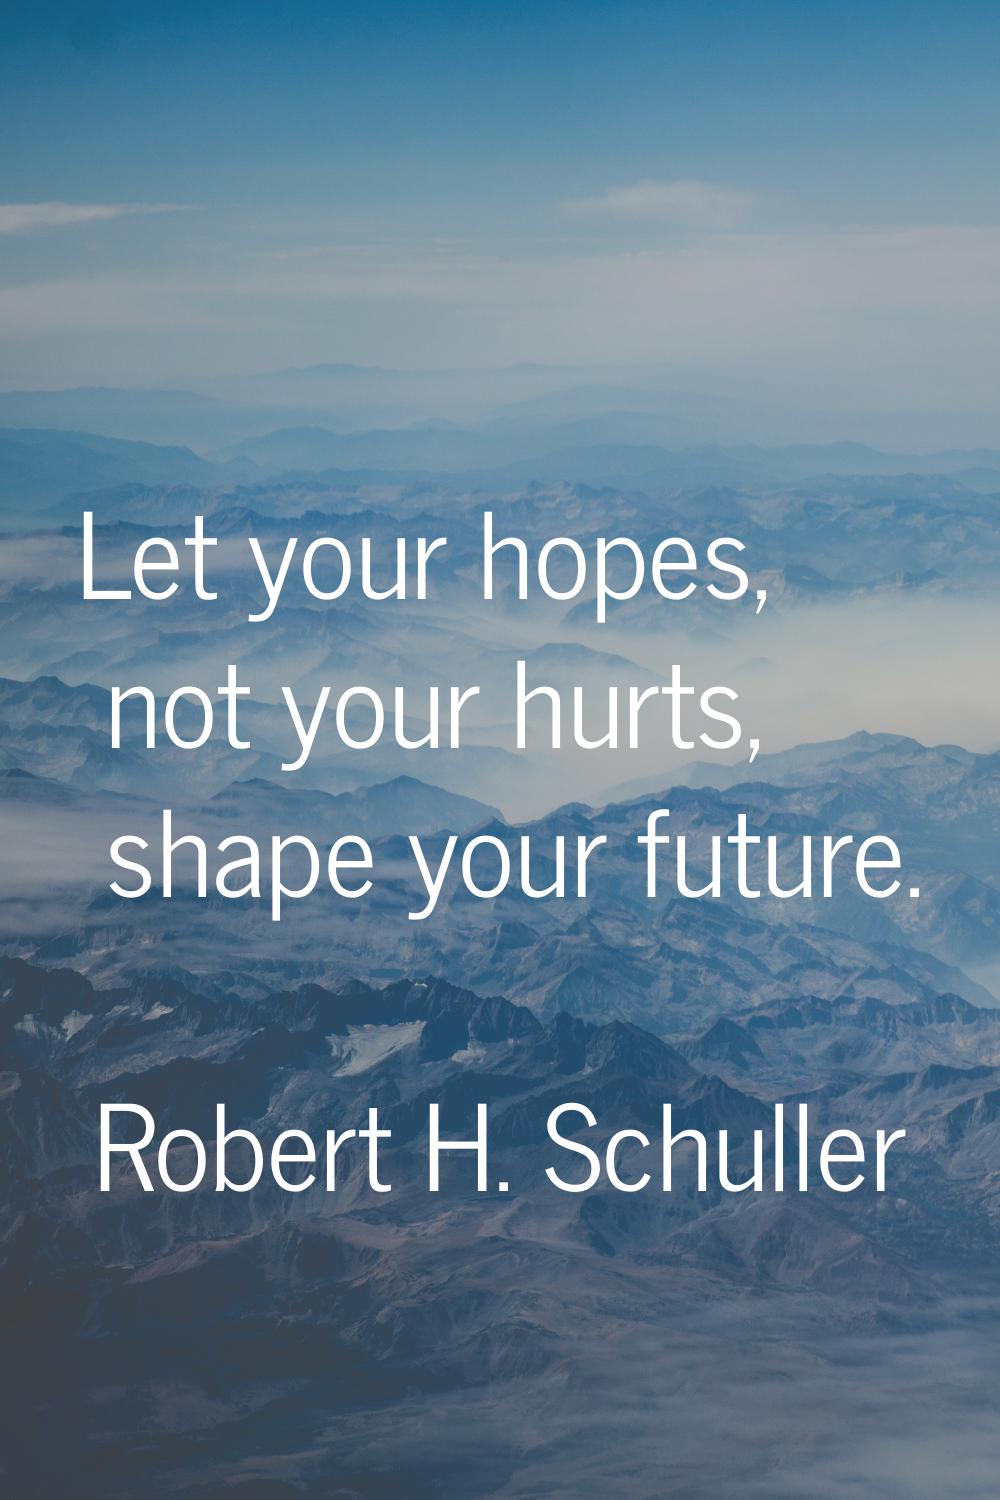 Let your hopes, not your hurts, shape your future.